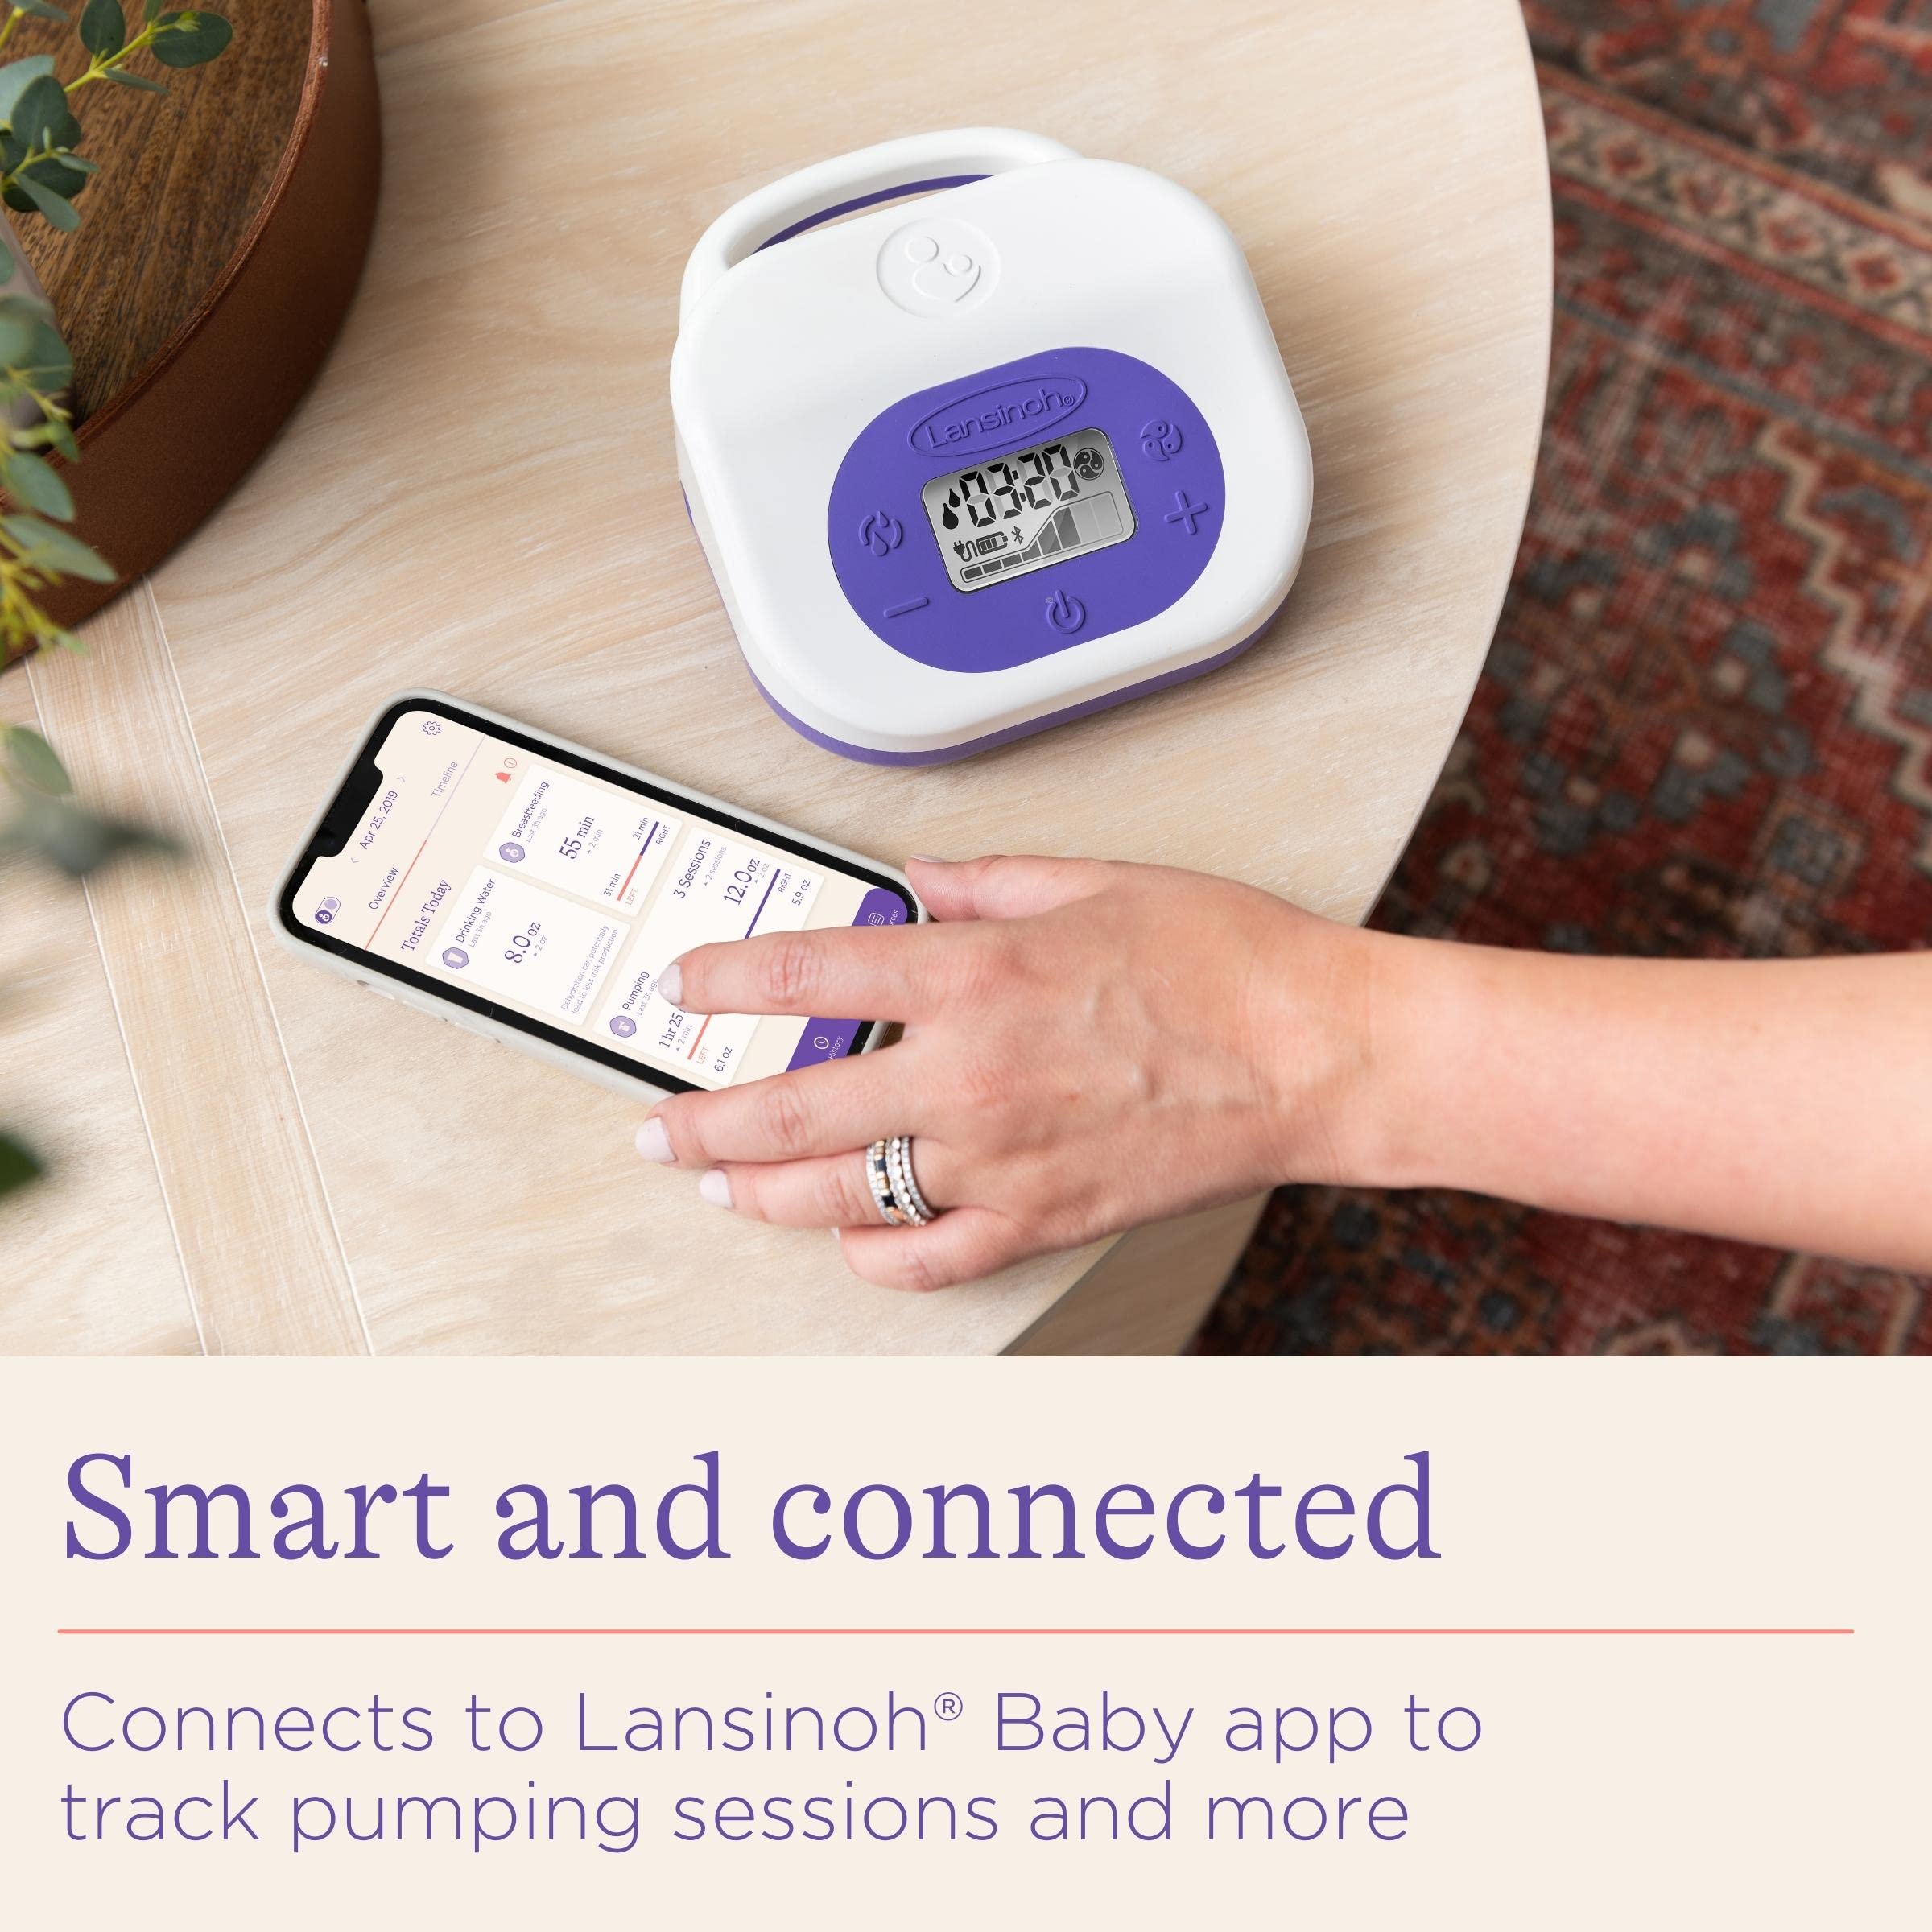 Lansinoh Smartpump 3.0 Double Electric Breast Pump, Portable and Rechargeable, Connects to Baby App, Hospital Strength Suction for Breastfeeding Moms